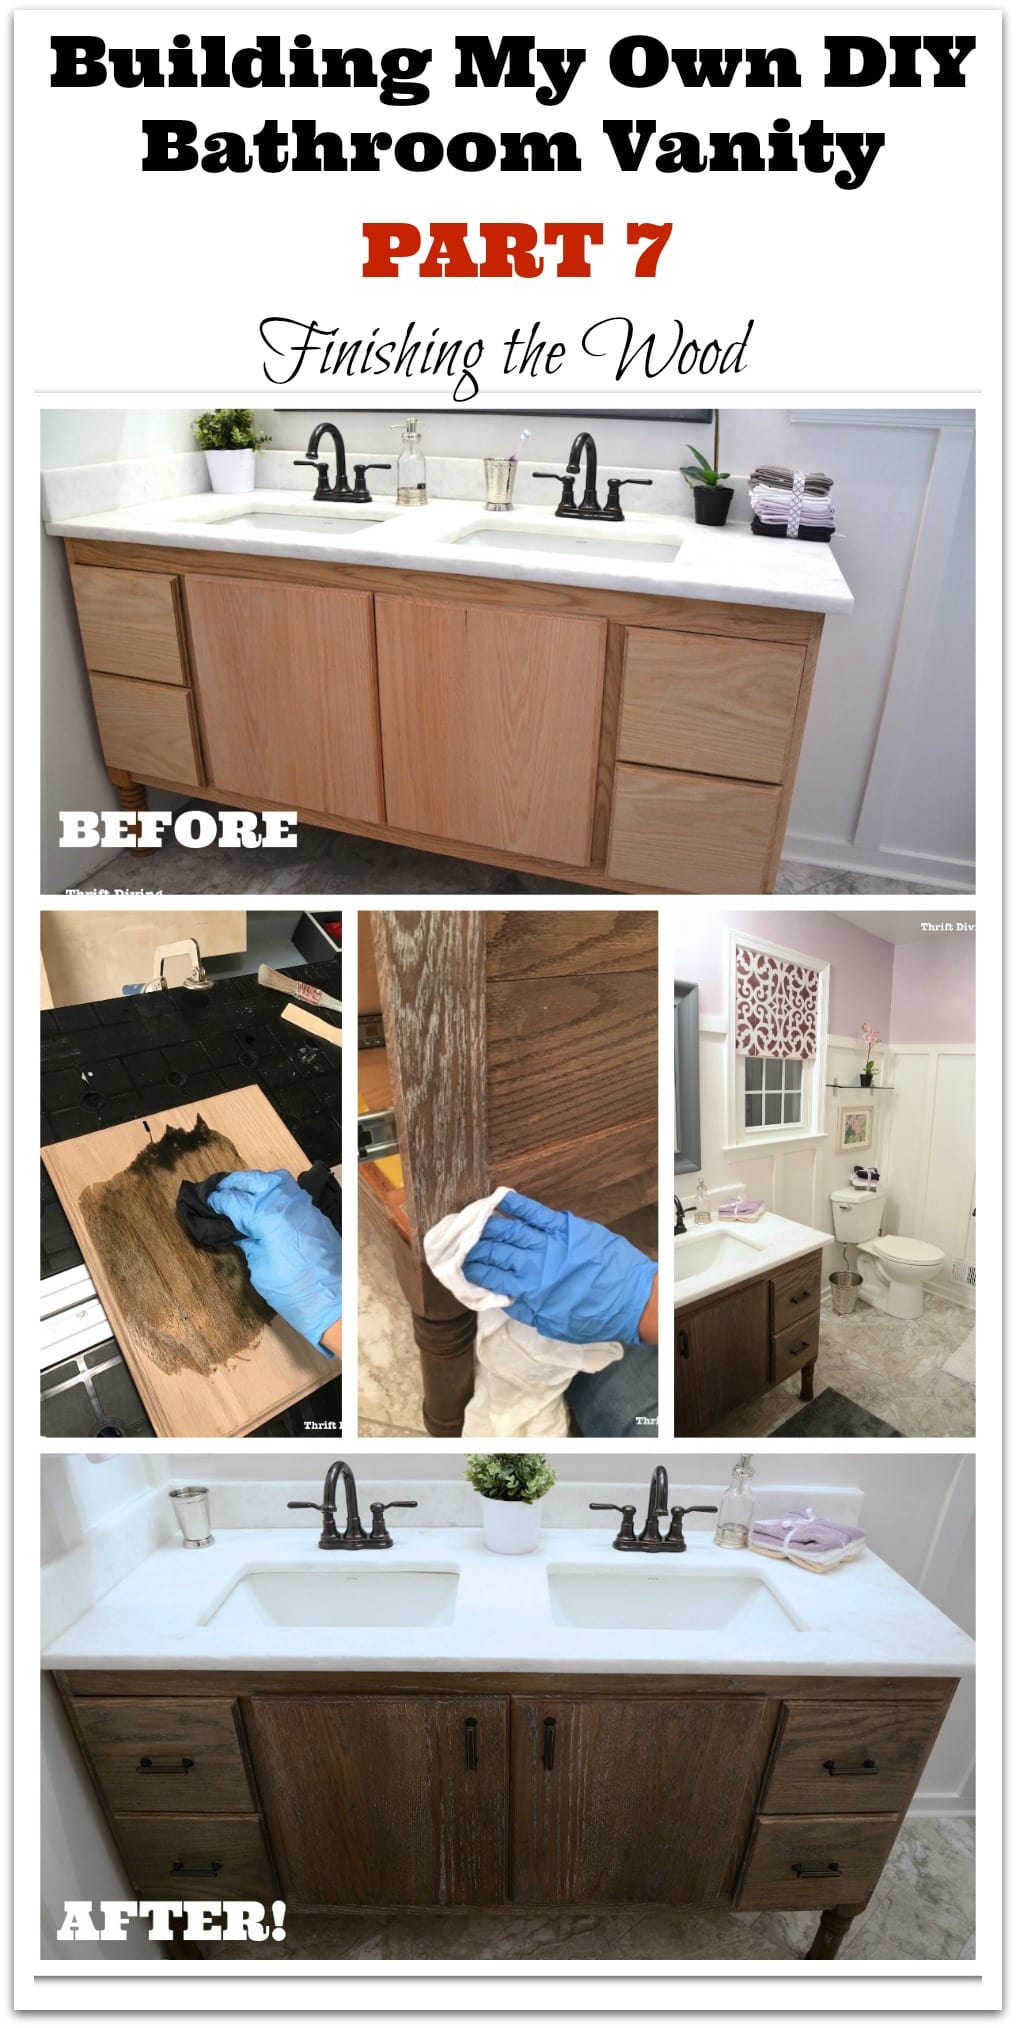 I Built a DIY Bathroom Vanity From Scratch - Finishing the Wood - Part 7 - Thrift Diving